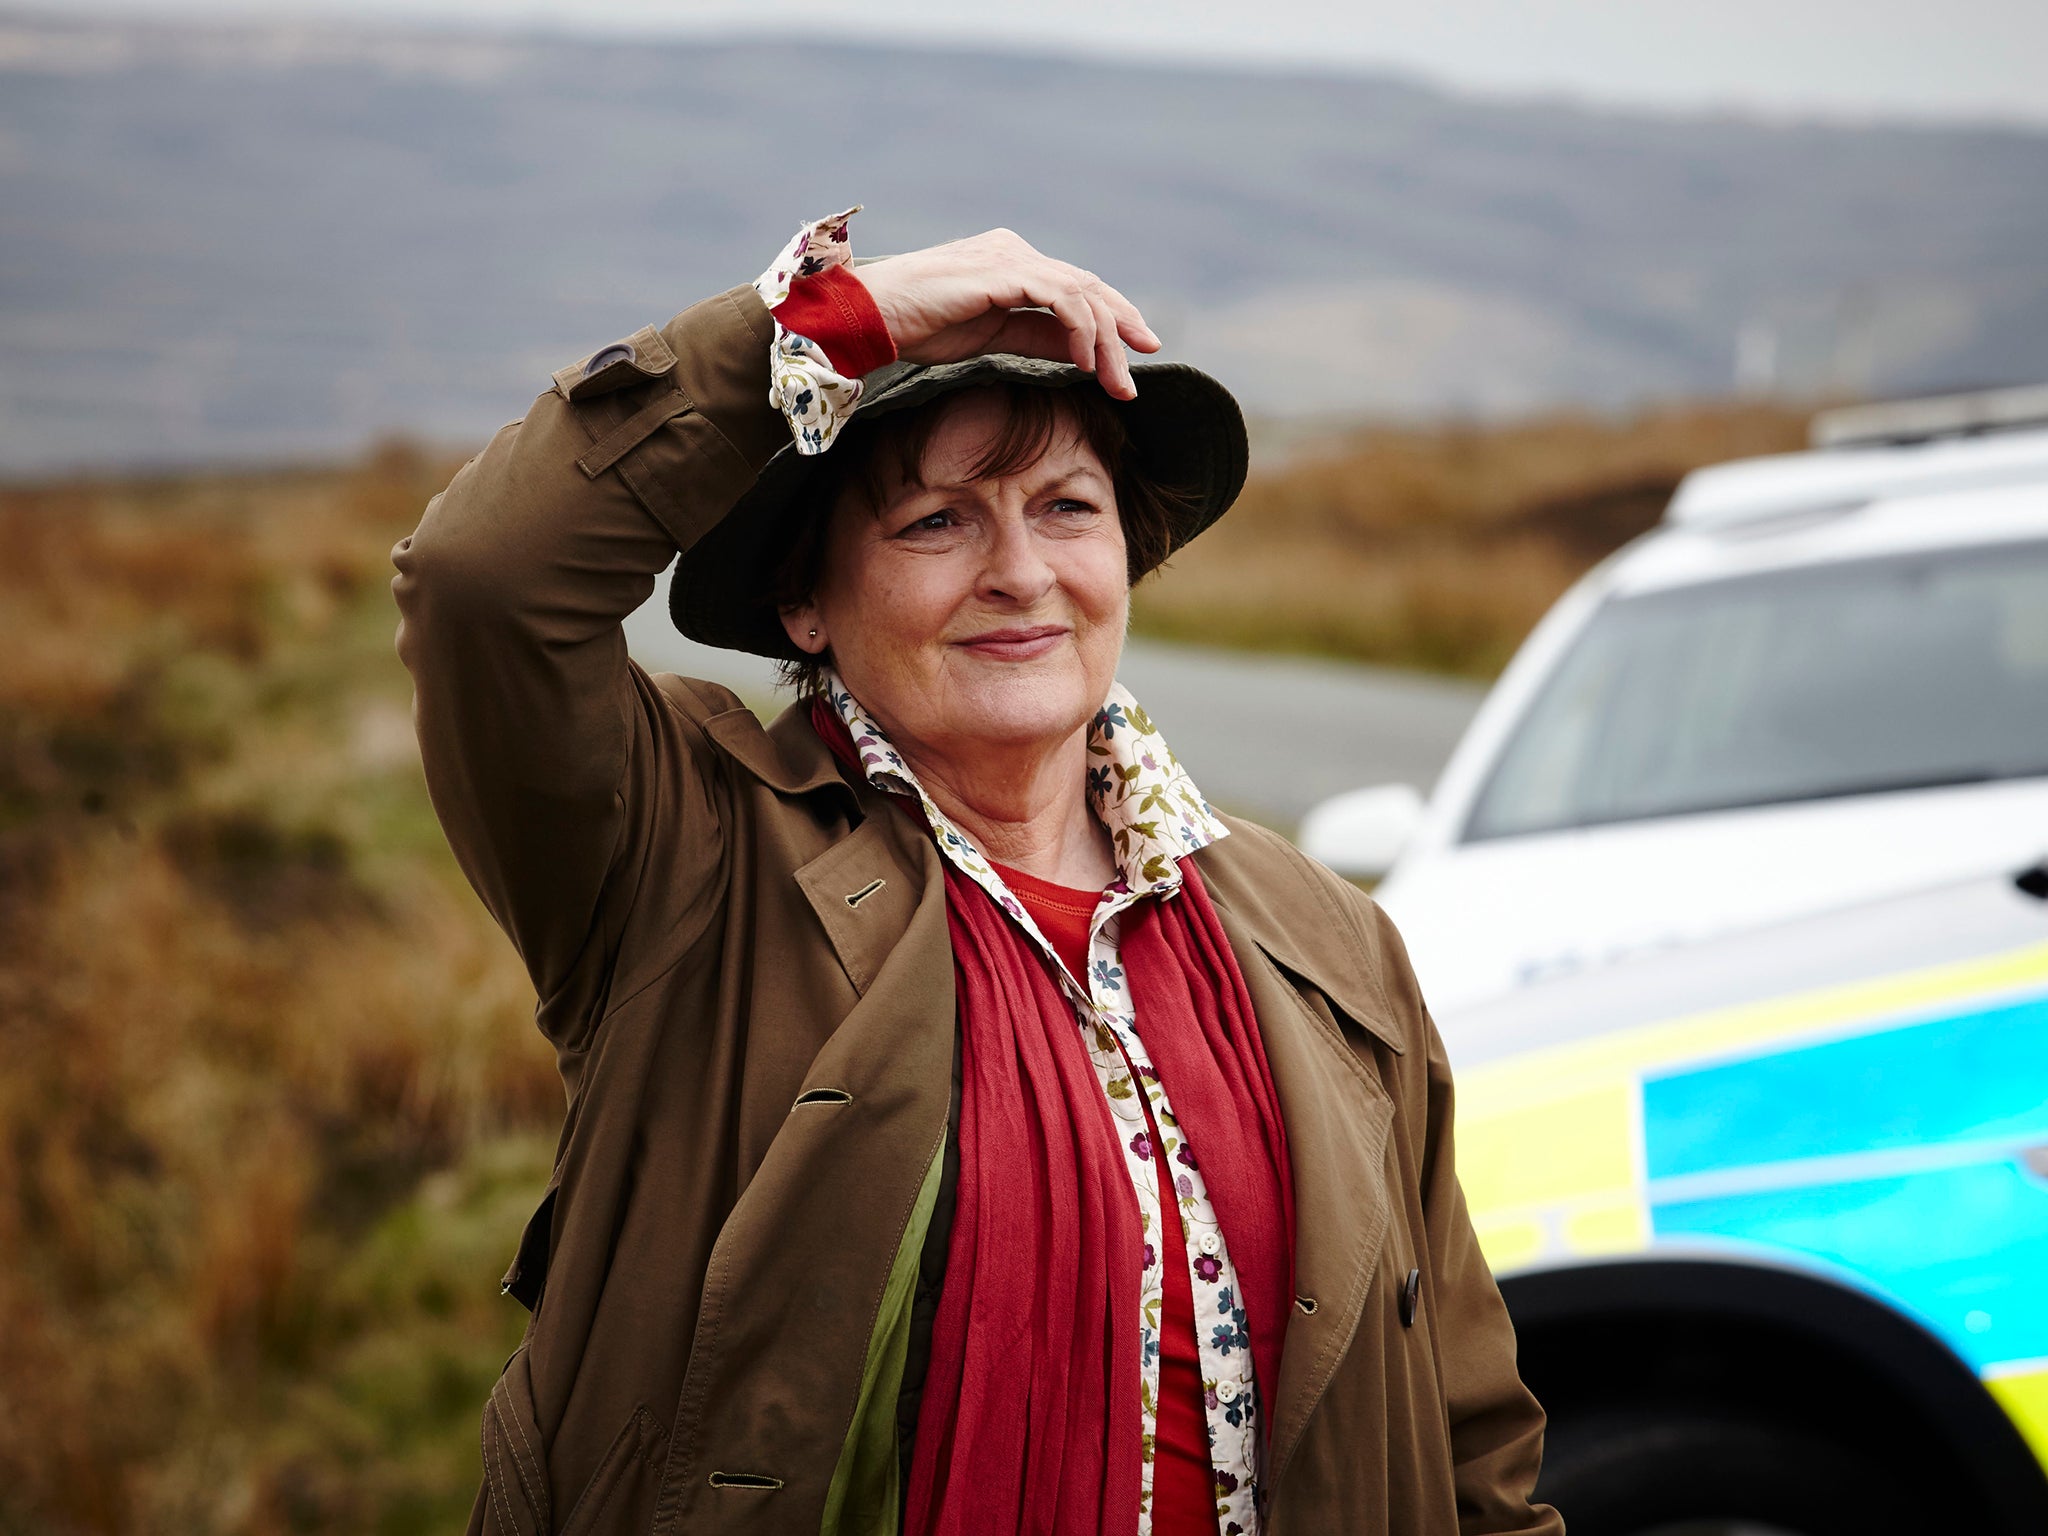 Long and winding road: Brenda Blethyn stars as the down-to-earth detective Vera